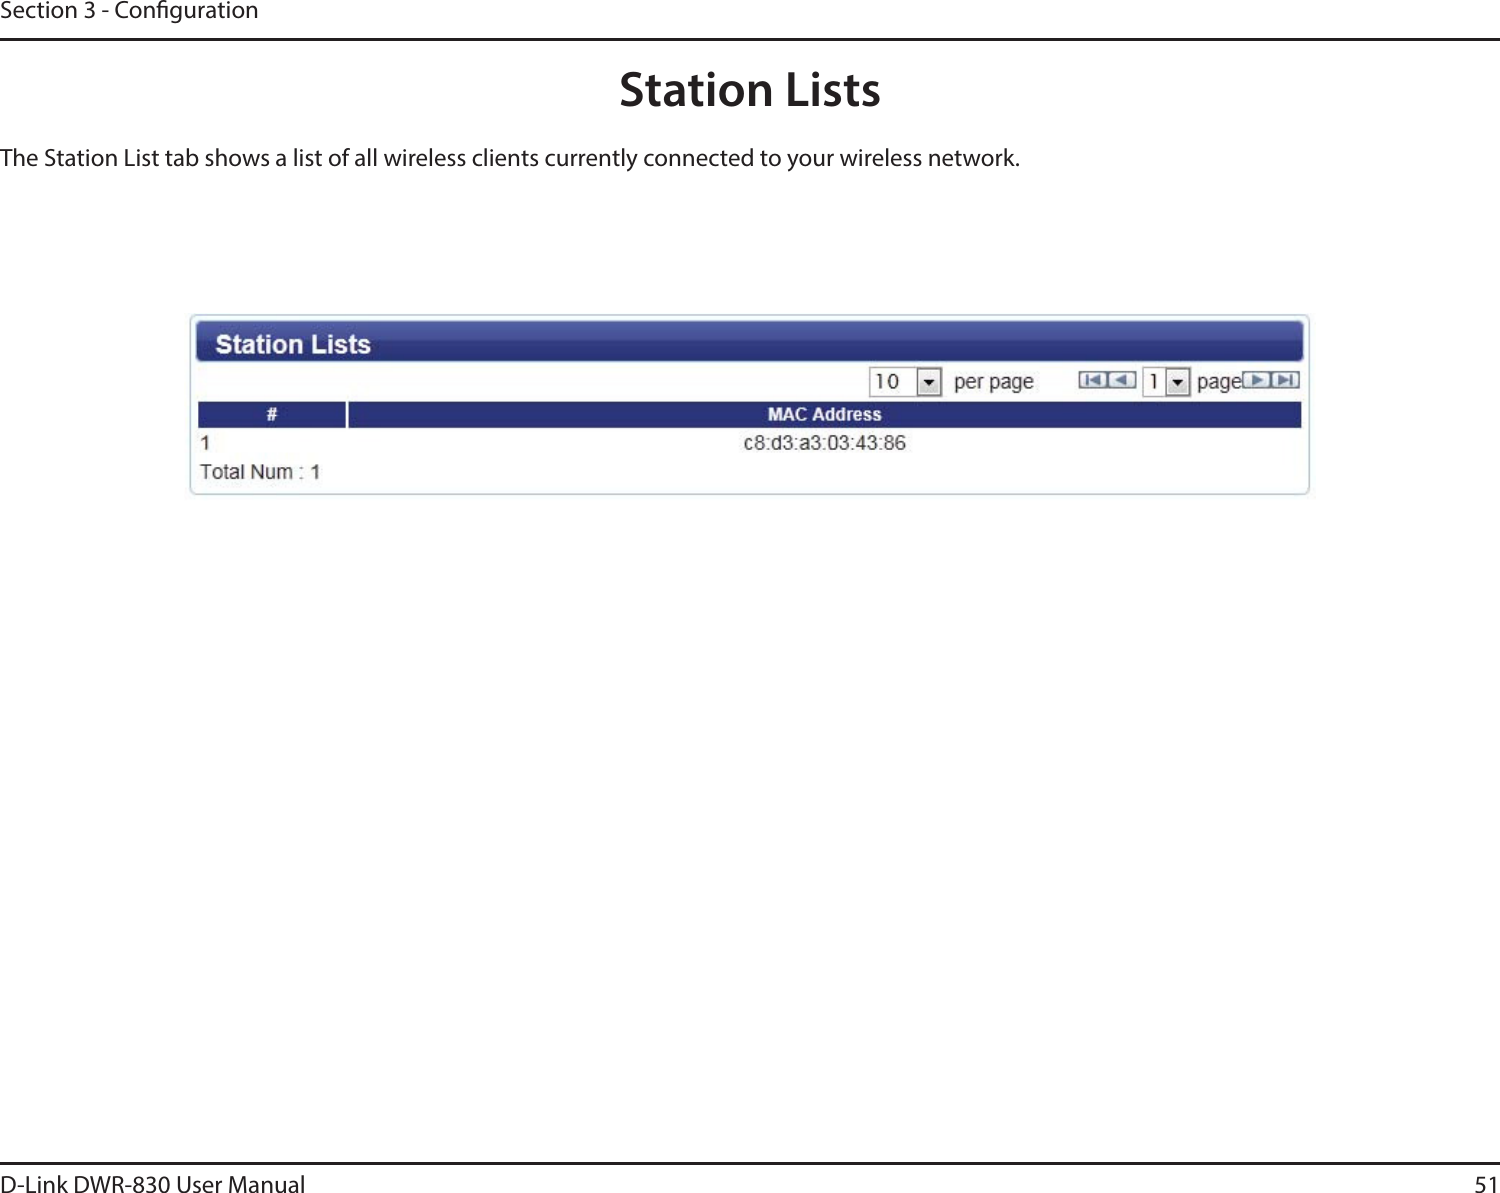 D-Link DWR-830 User Manual 51Section 3 - CongurationThe Station List tab shows a list of all wireless clients currently connected to your wireless network. Station Lists